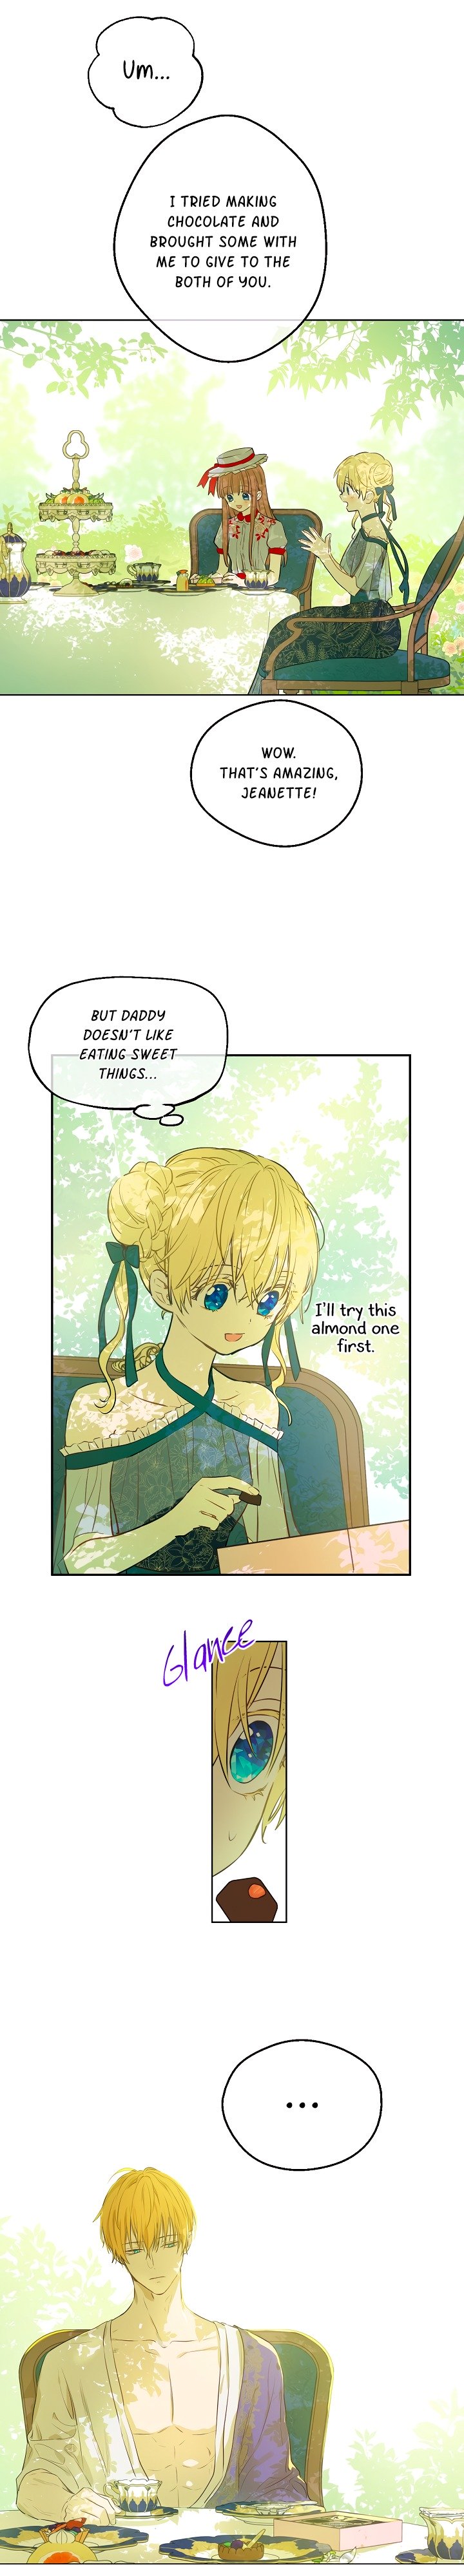 Suddenly Became A Princess One Day ch.73